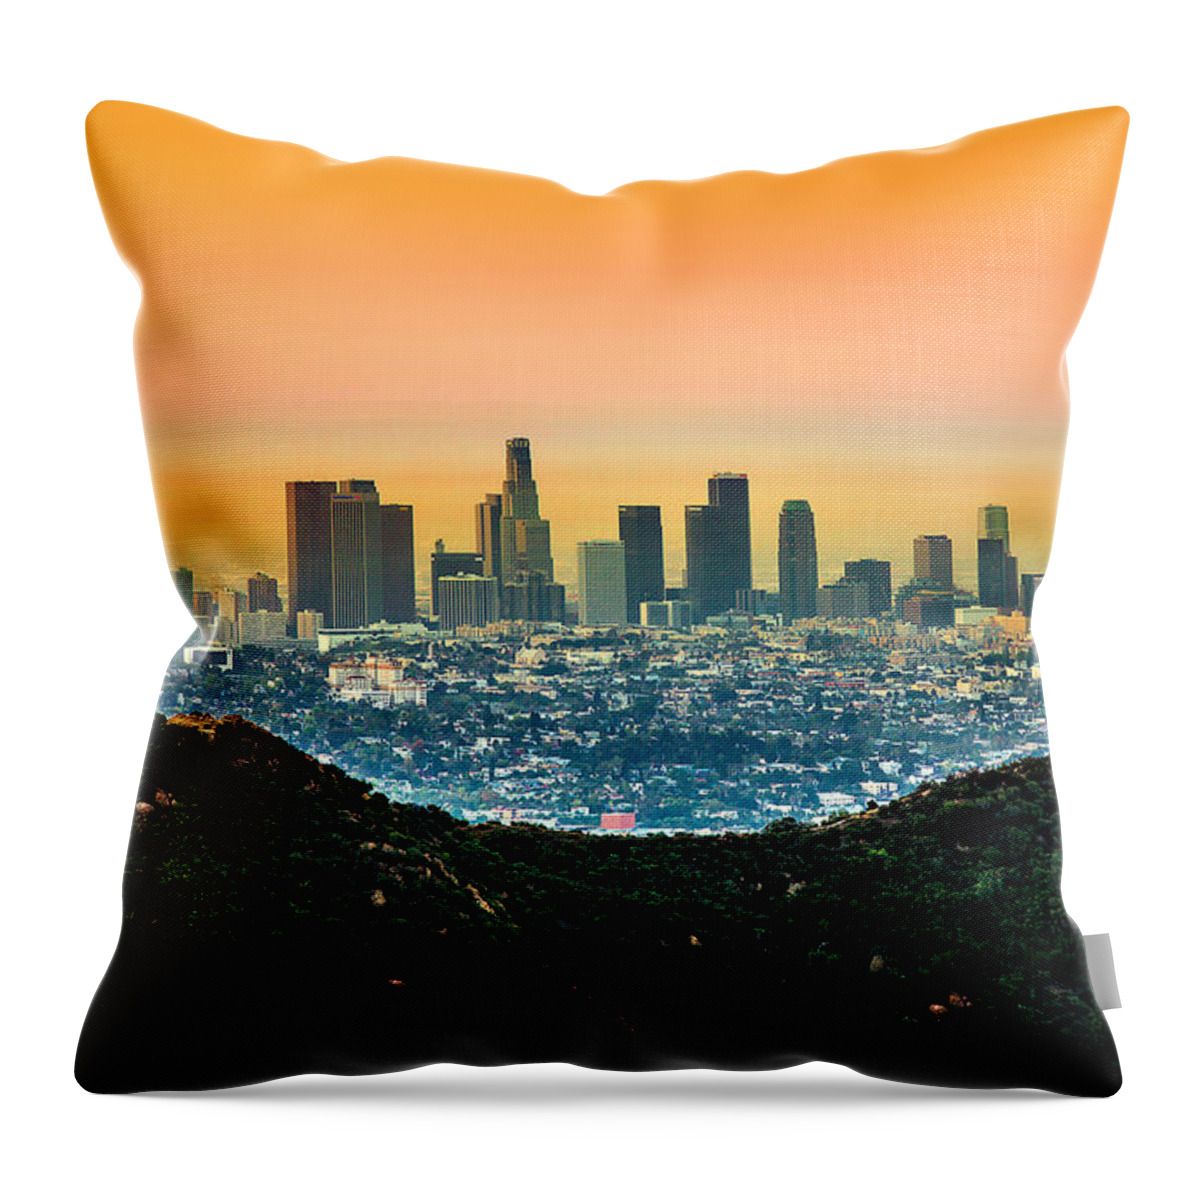 Los Angeles Throw Pillow featuring the photograph Good Morning LA by Az Jackson